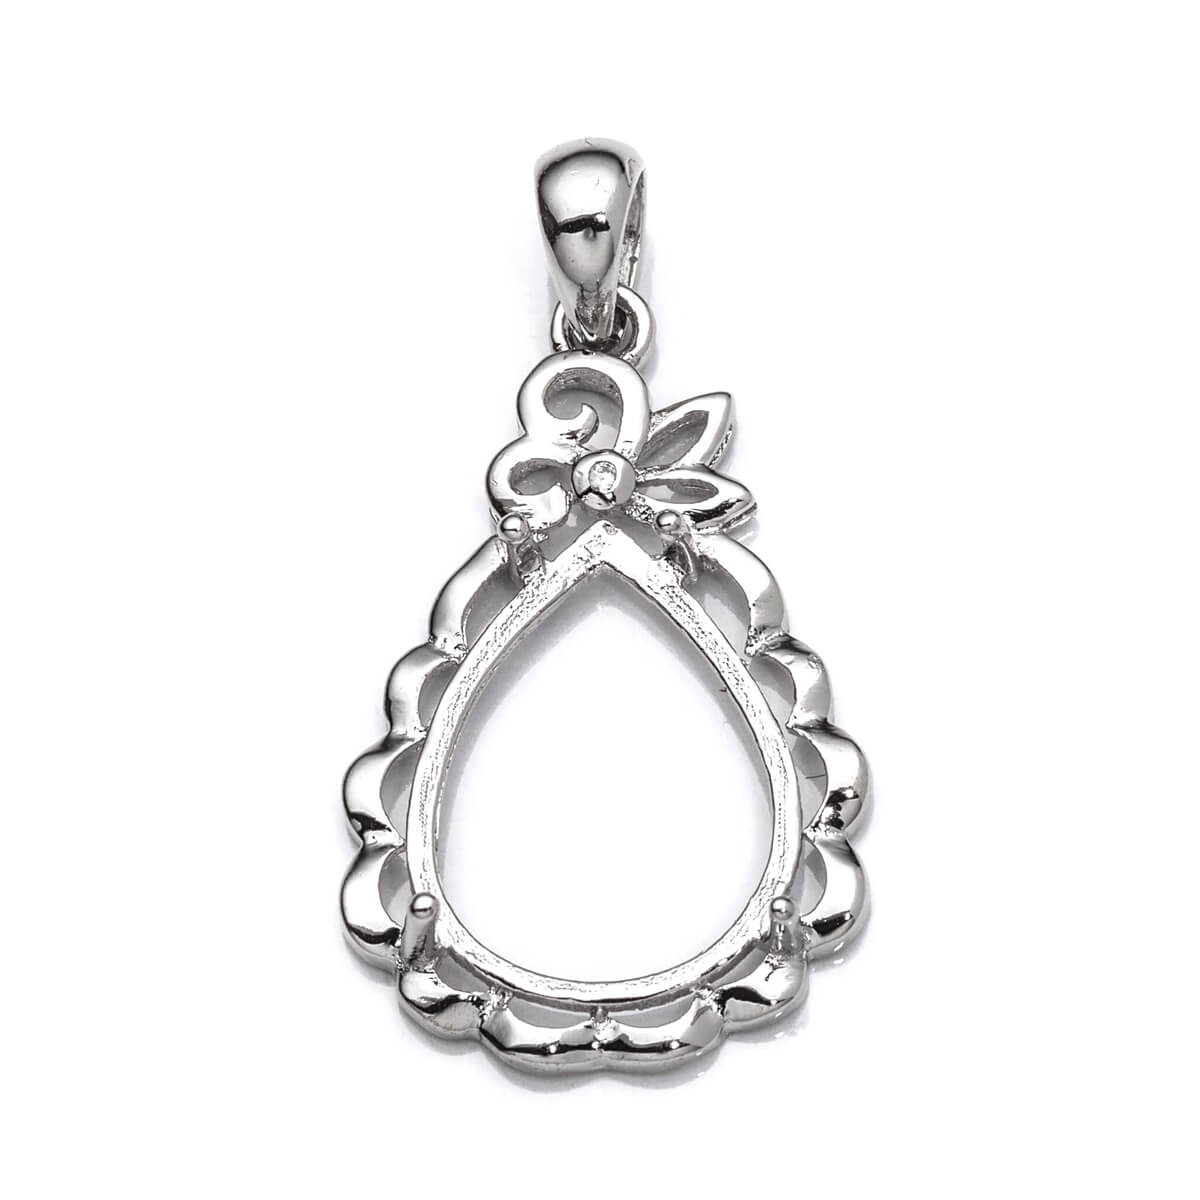 Pear Pendant with Cubic Zirconia Inlays and Pear Shape Mounting and Bail in Sterling Silver 11x15mm 